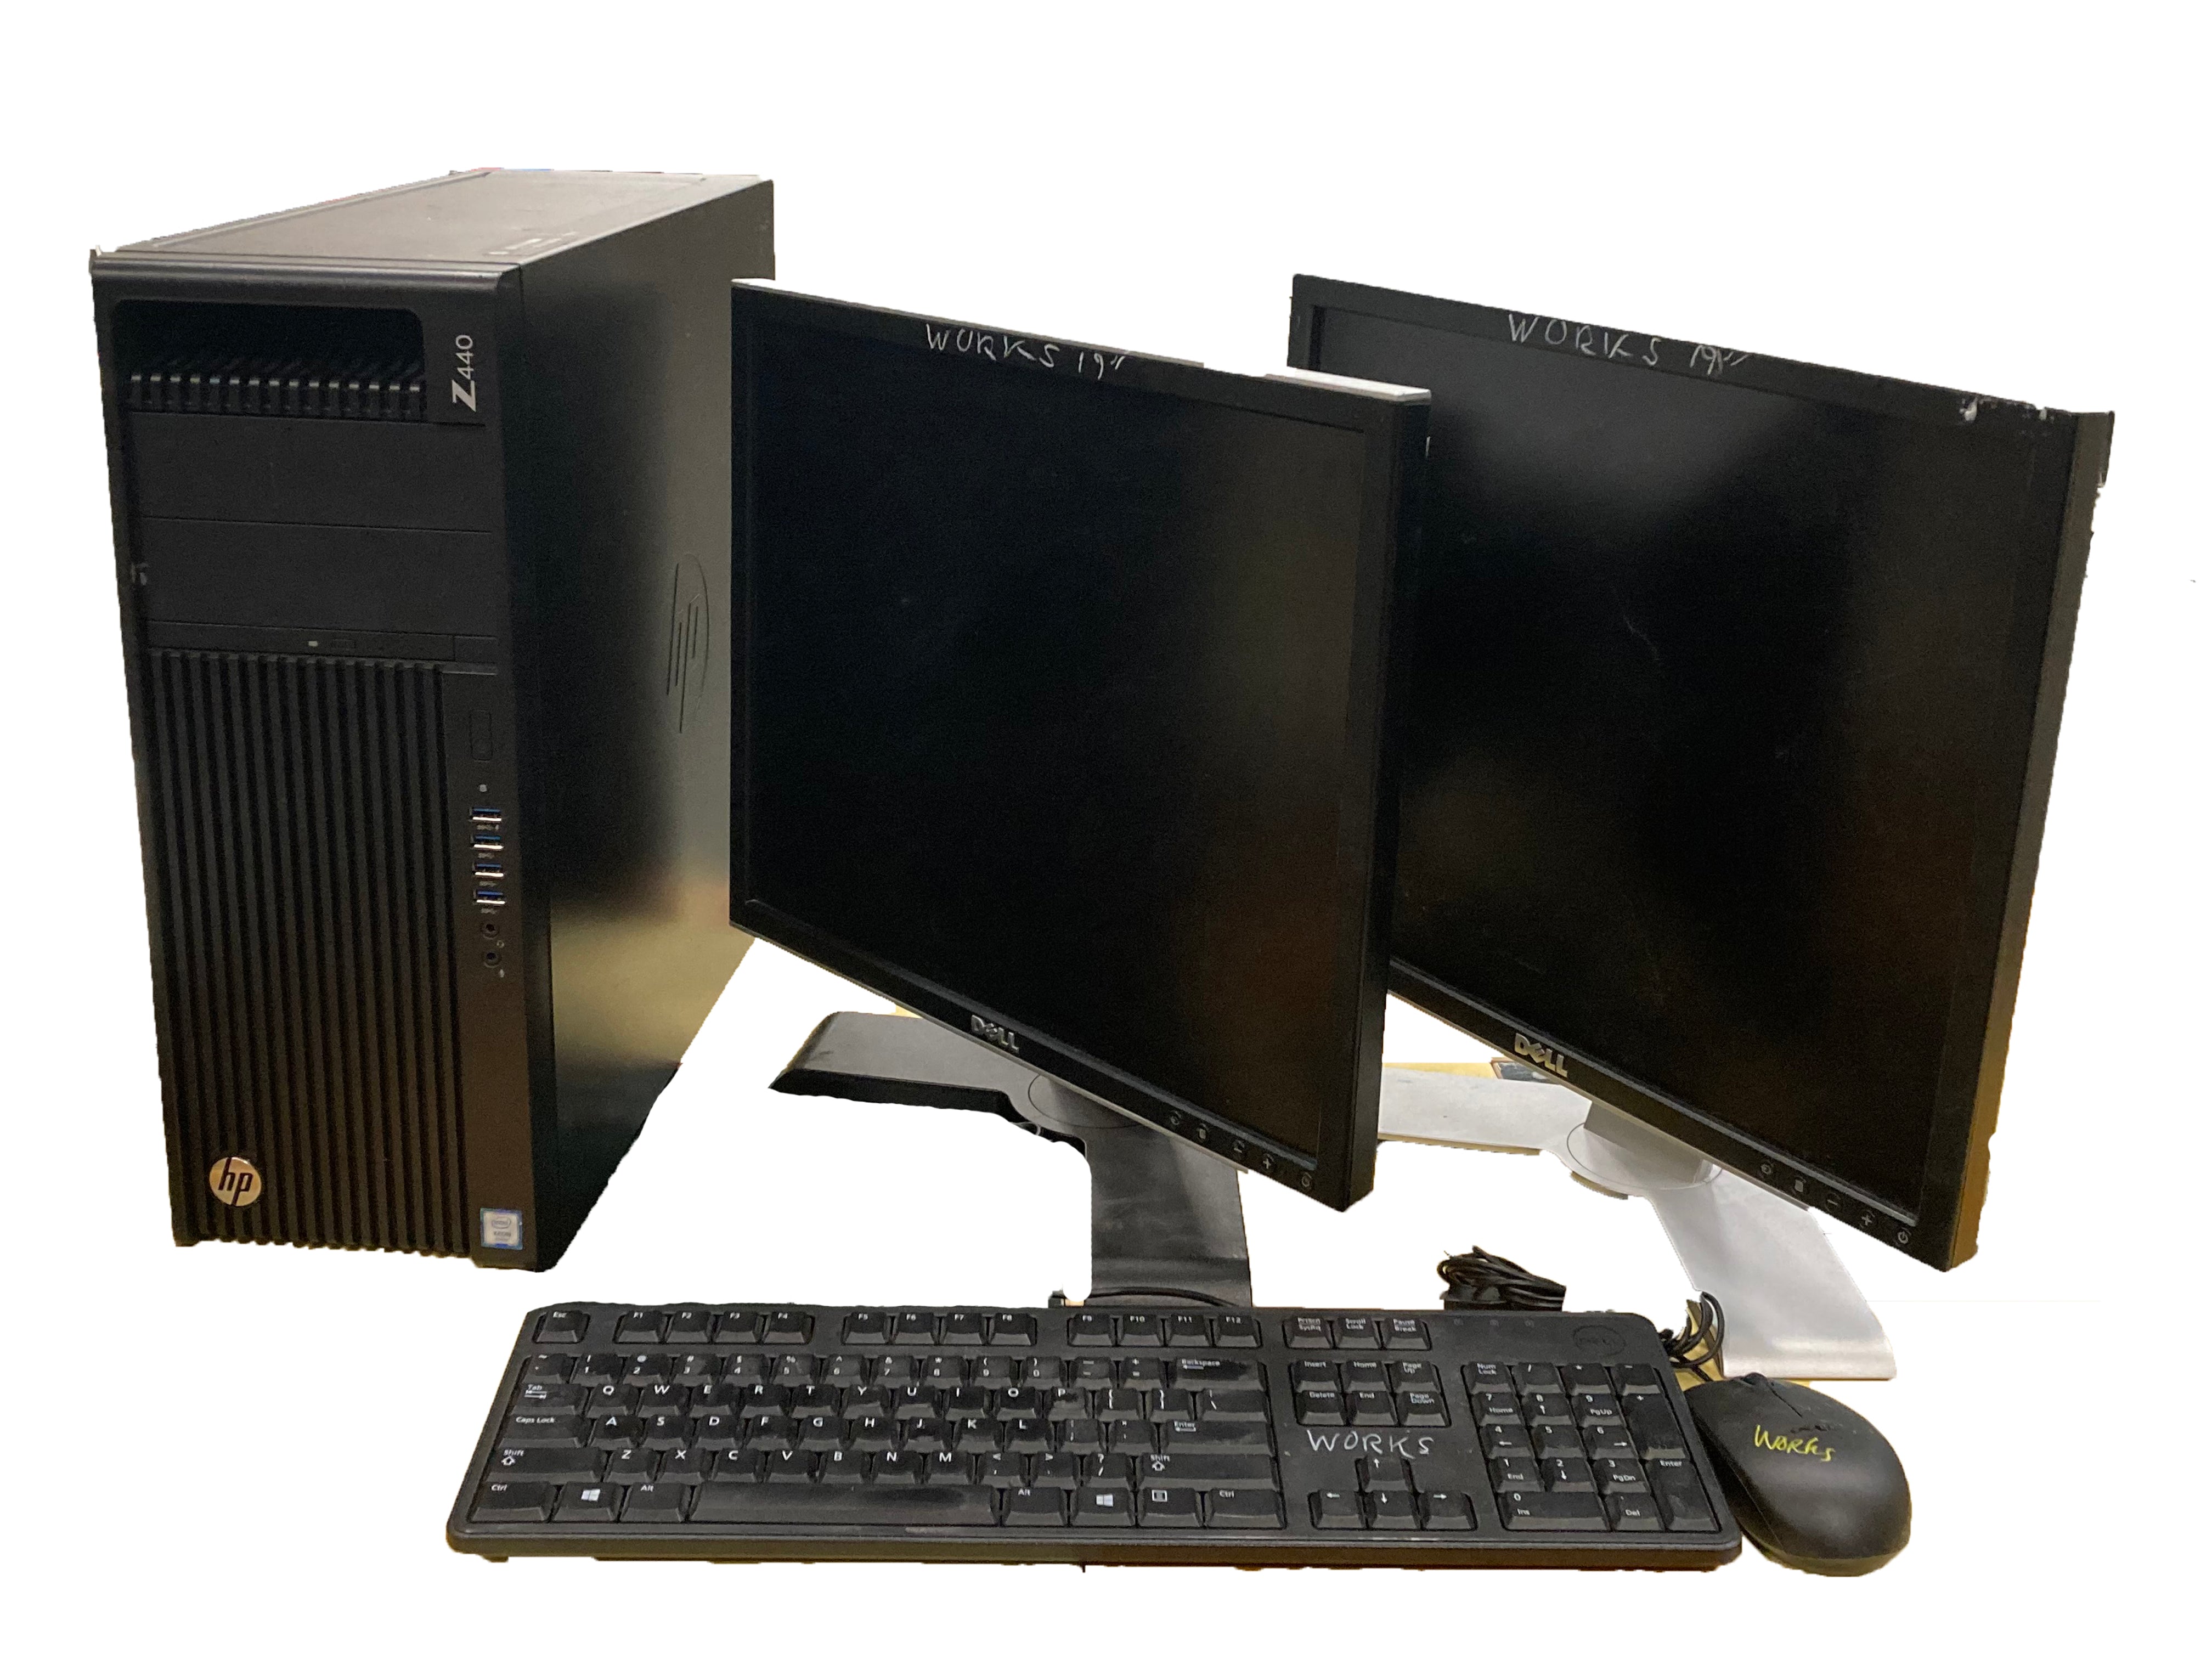 HP Z440 Workstation Xeon E5 16GB RAM with Windows 10 Pro #1 Bundle with Monitors, Mouse & Keyboard